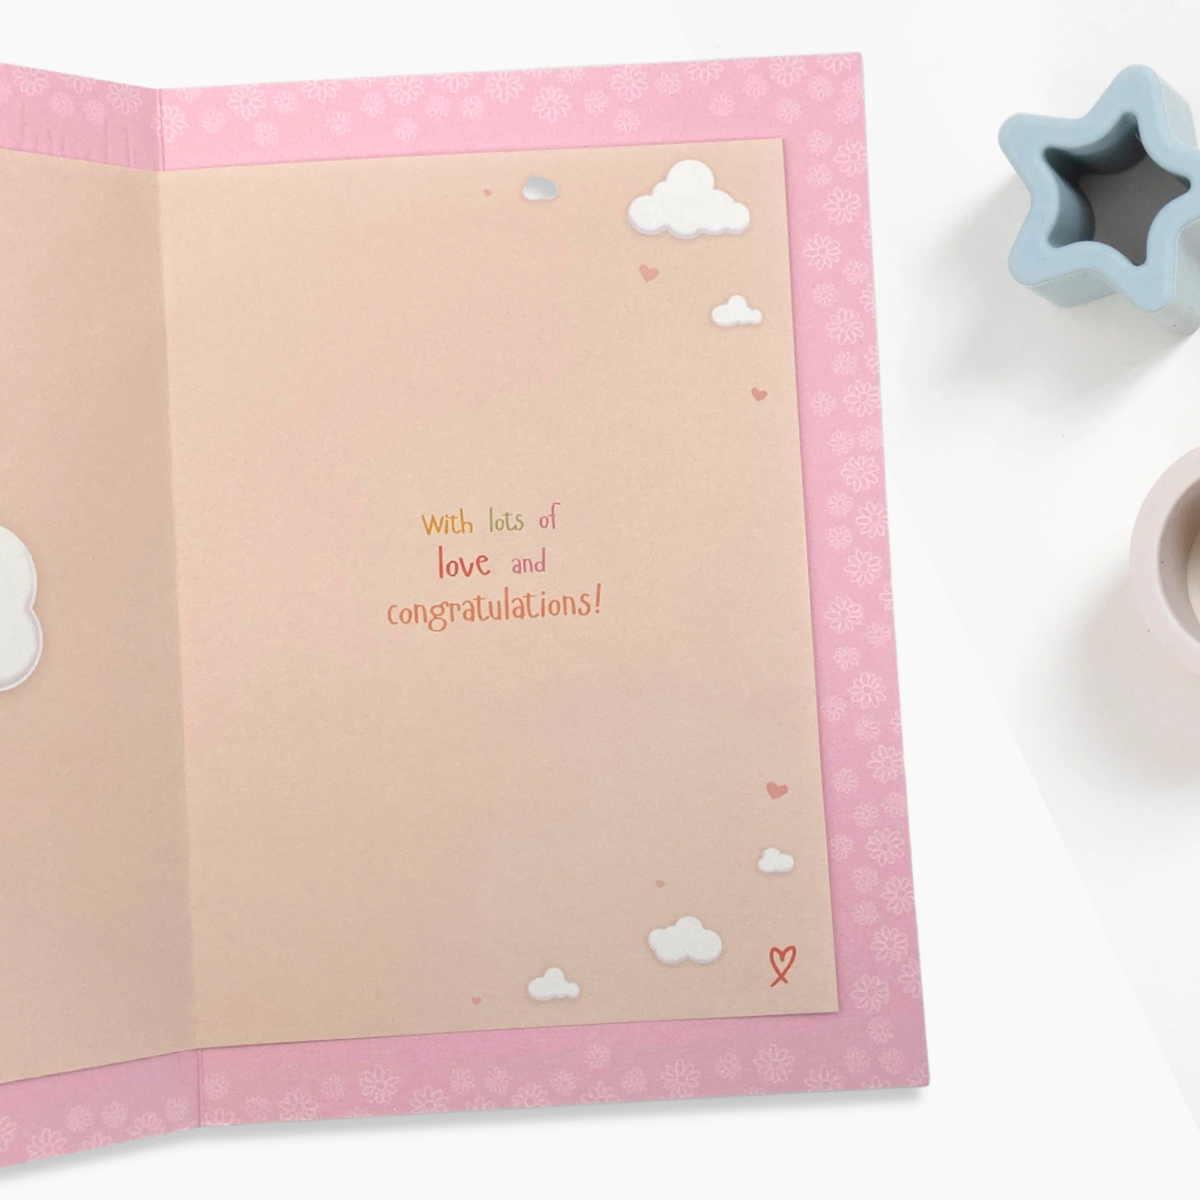 Inside image with pink border and peach insert and text